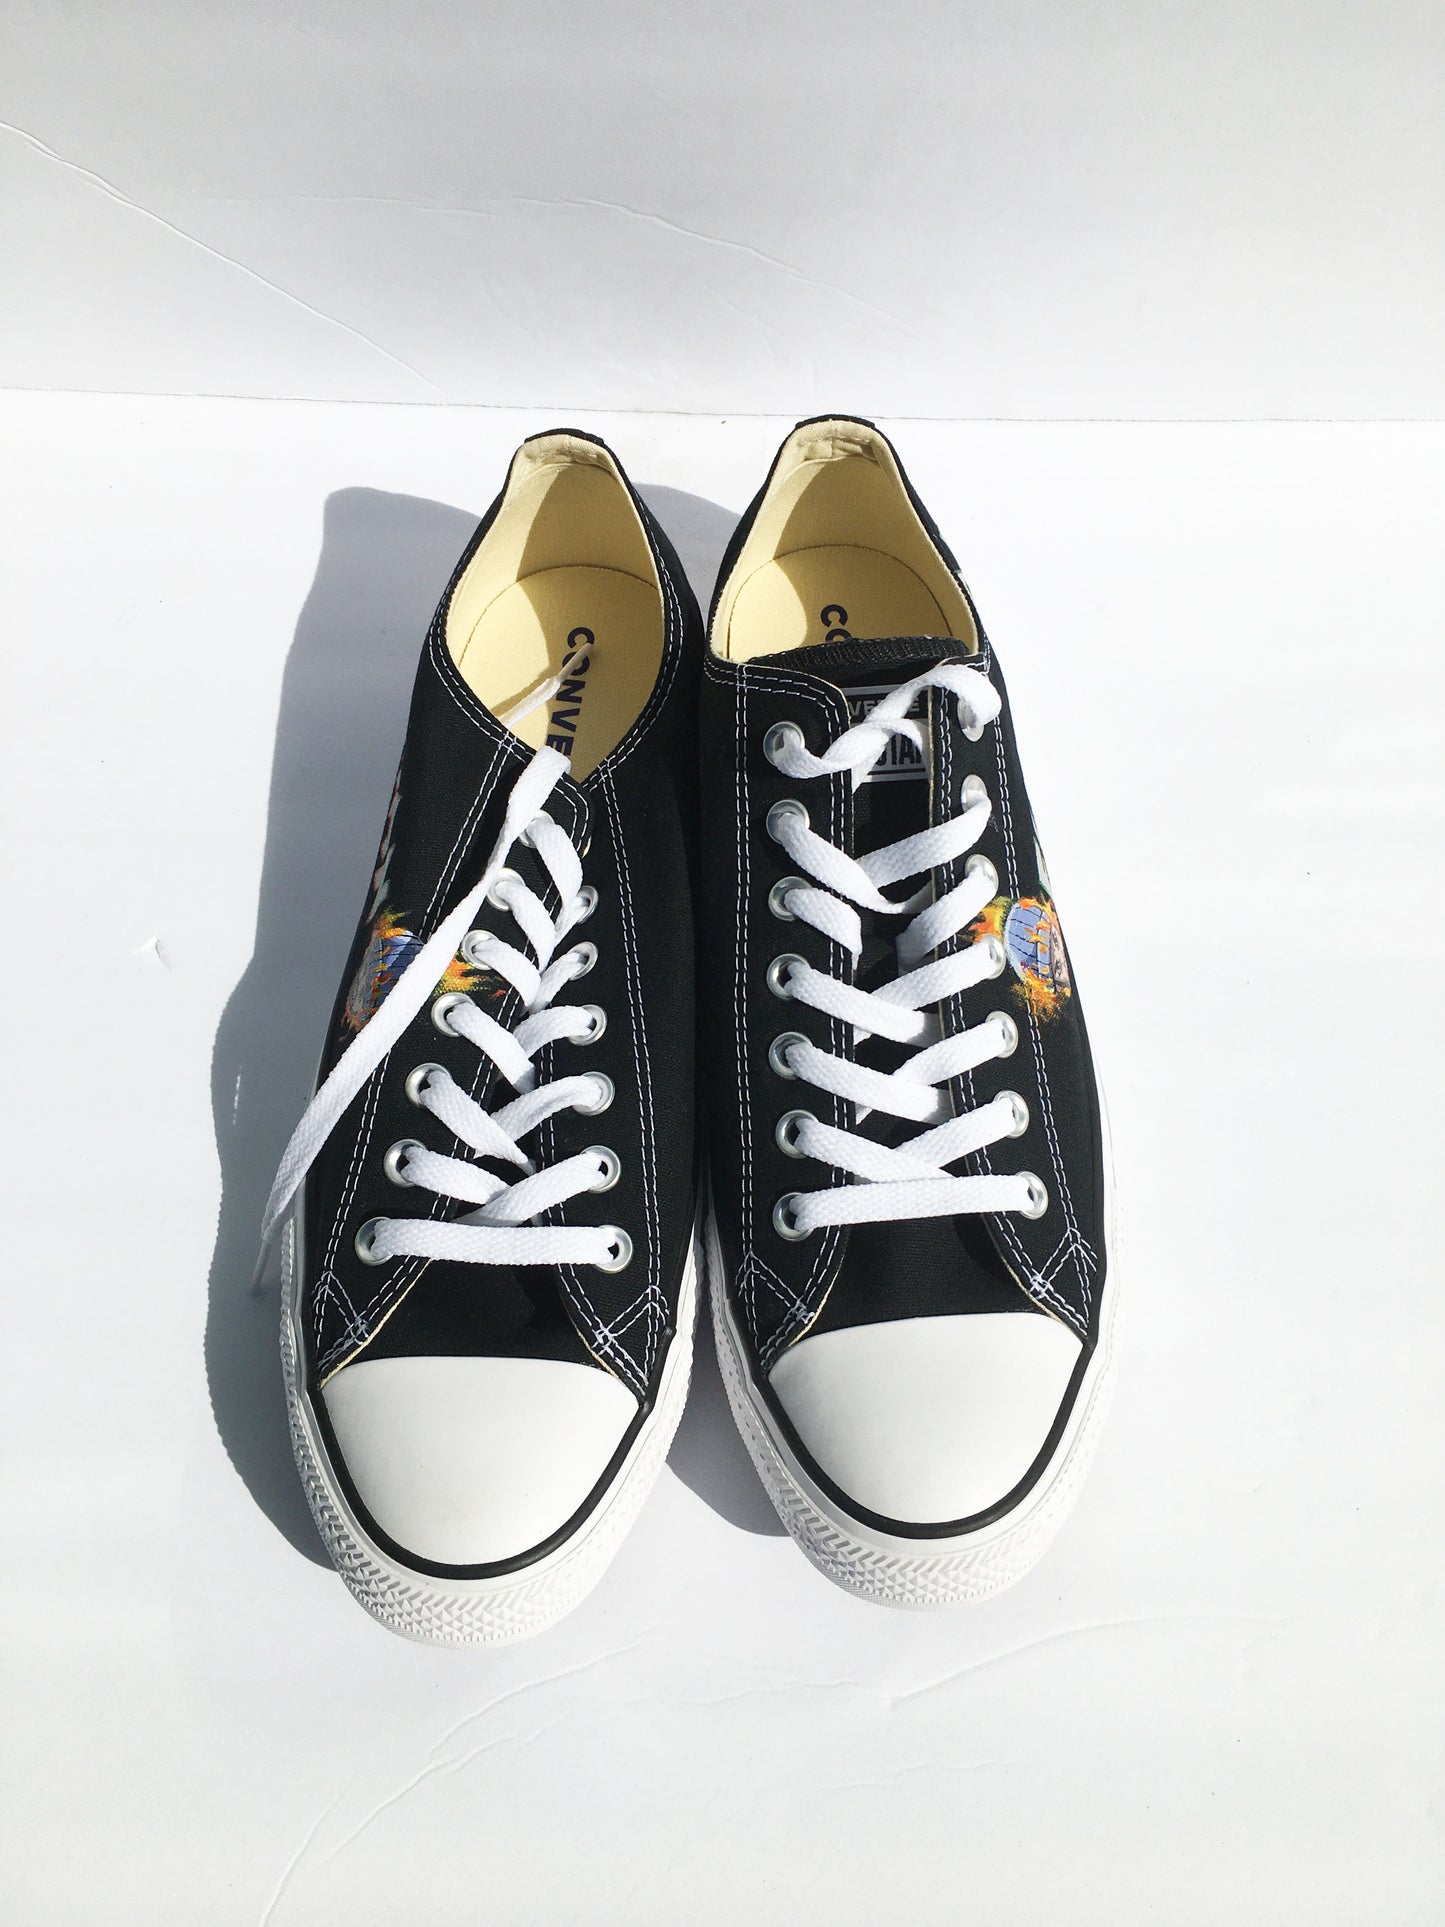 Fiyaman Converse Chuck Taylor All Star Low Tops in Black